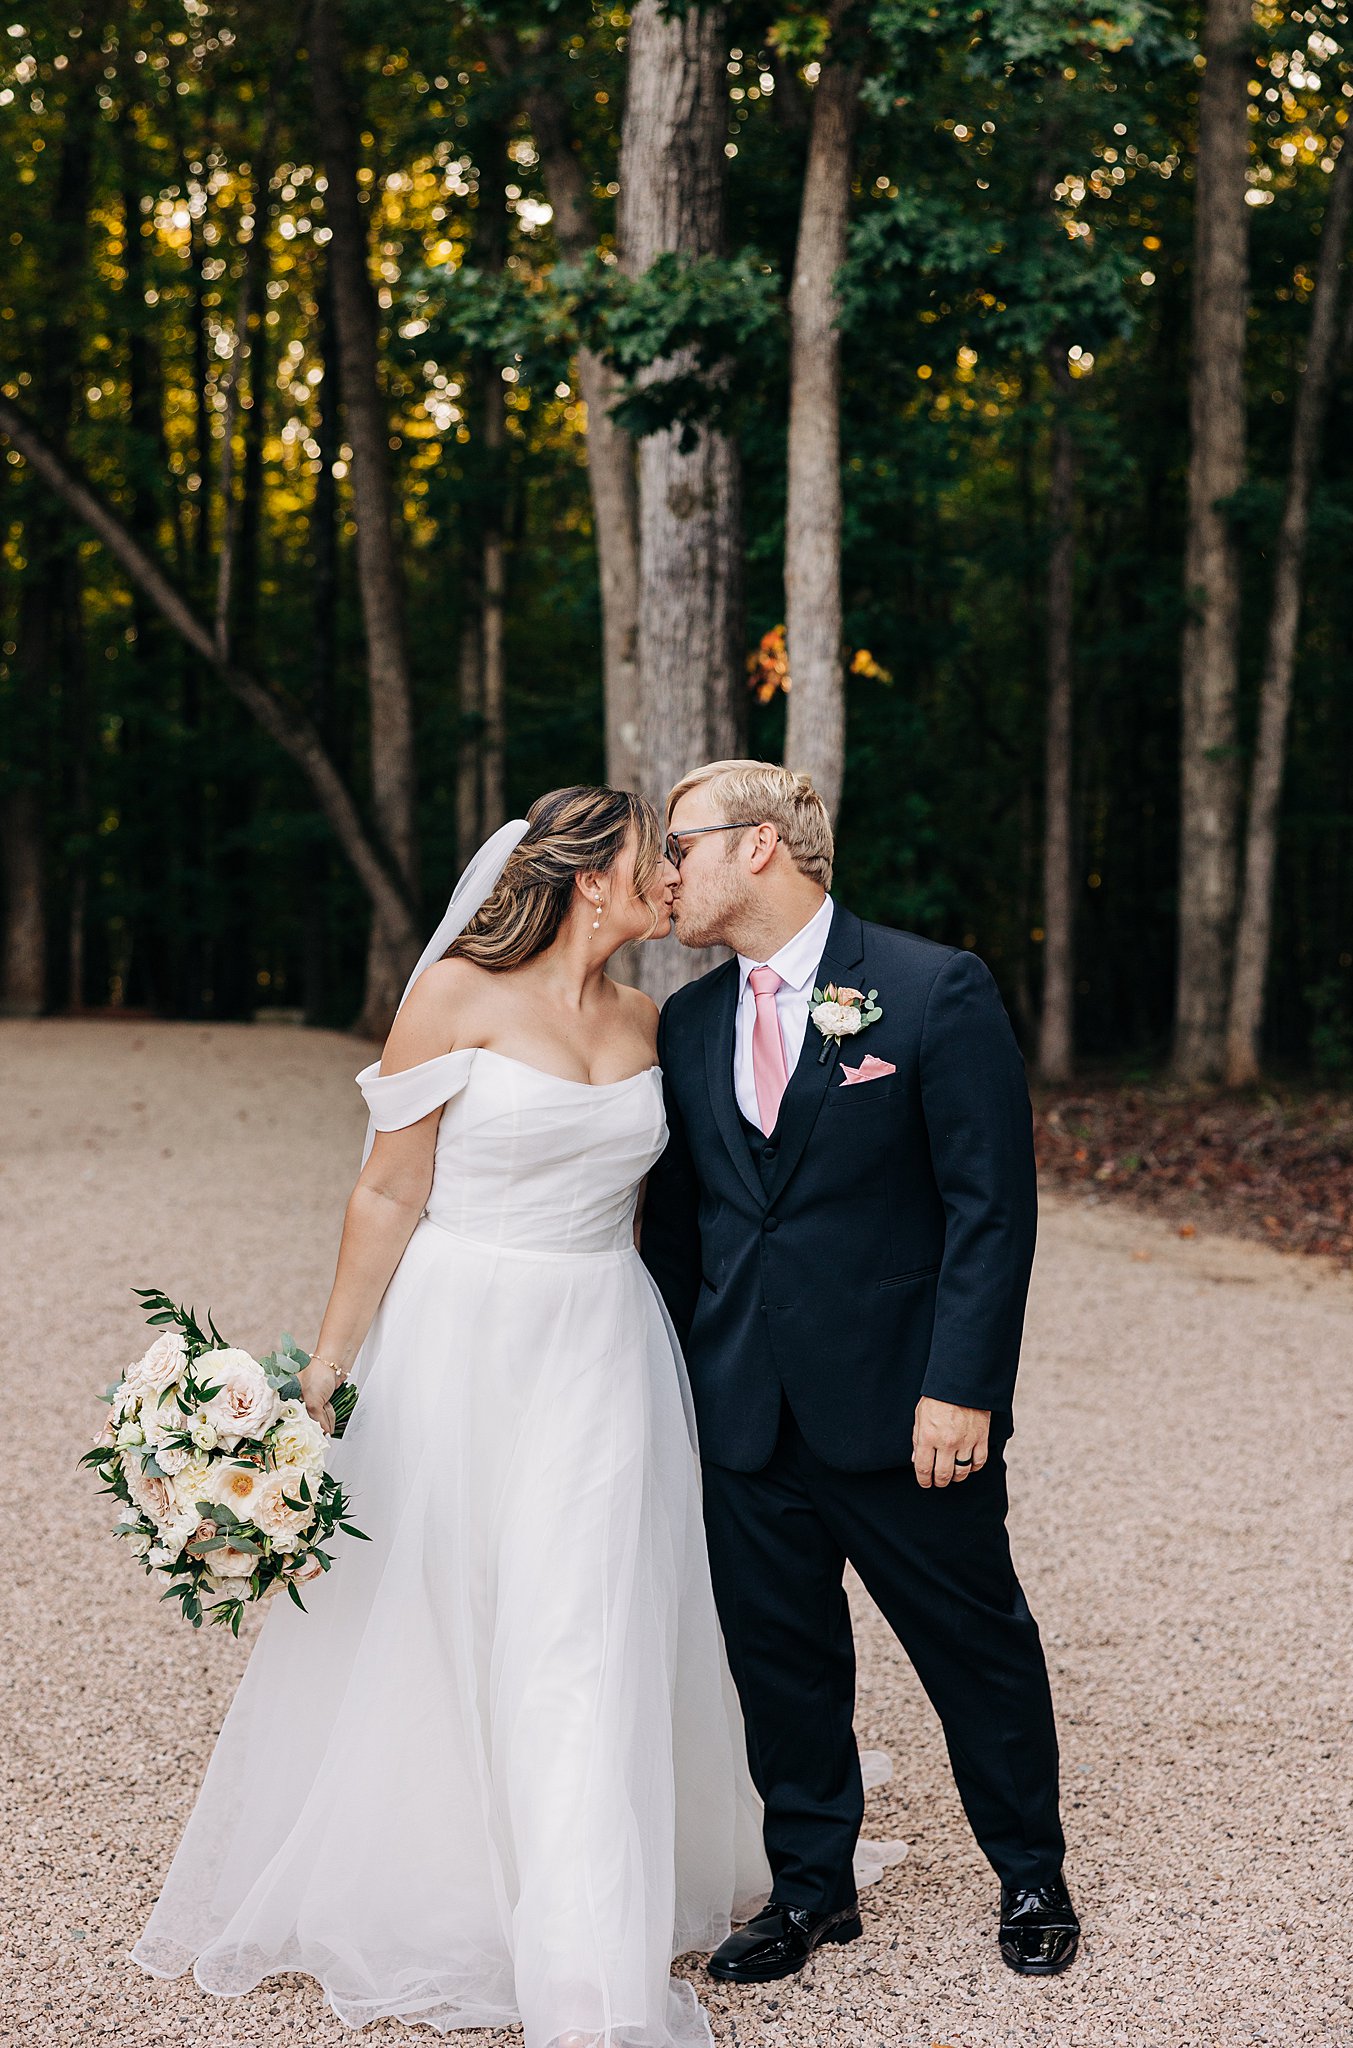 A bride and groom stand on a gravel path in the woods and share a kiss